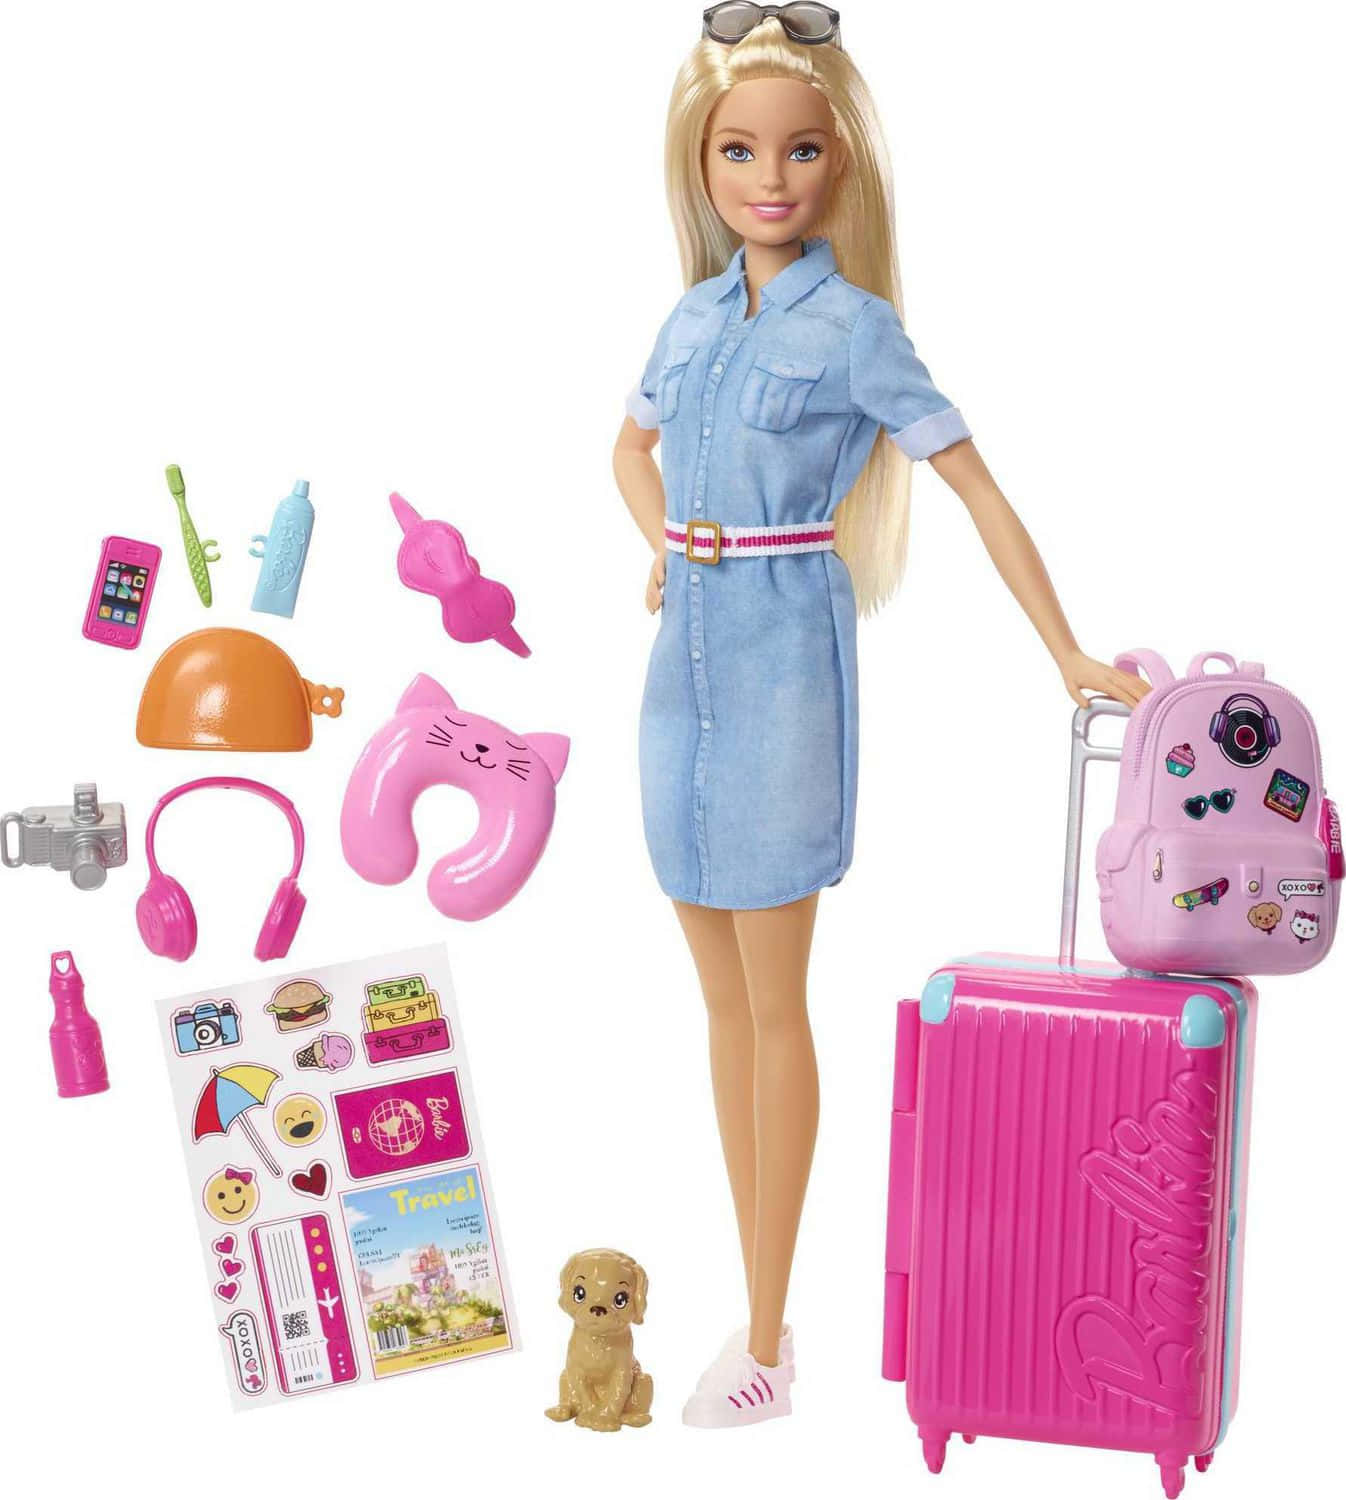 Barbie Travels With A Suitcase And Accessories